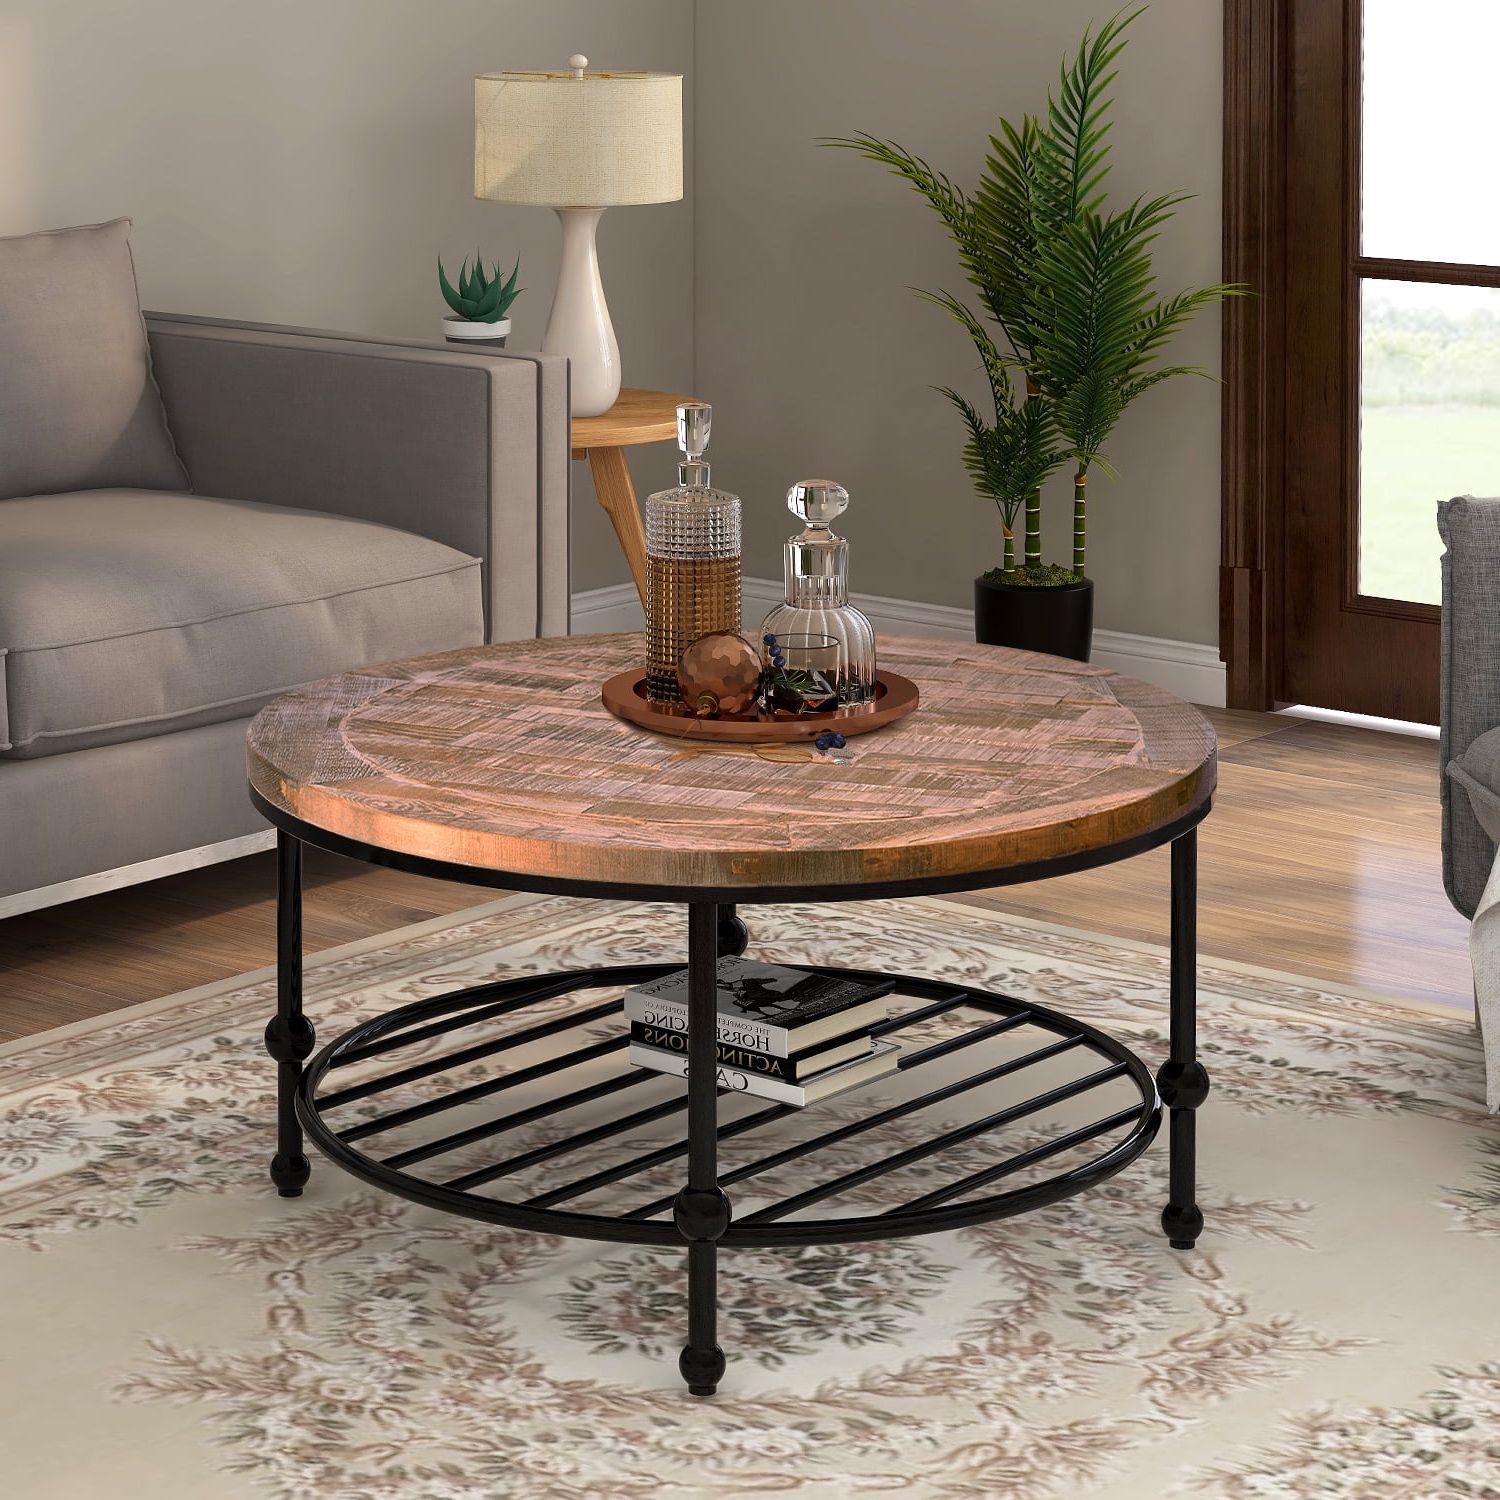 Favorite Rustic Natural Round Coffee Table With Storage Shelf For Living Room Within Coffee Tables With Open Storage Shelves (Photo 10 of 15)